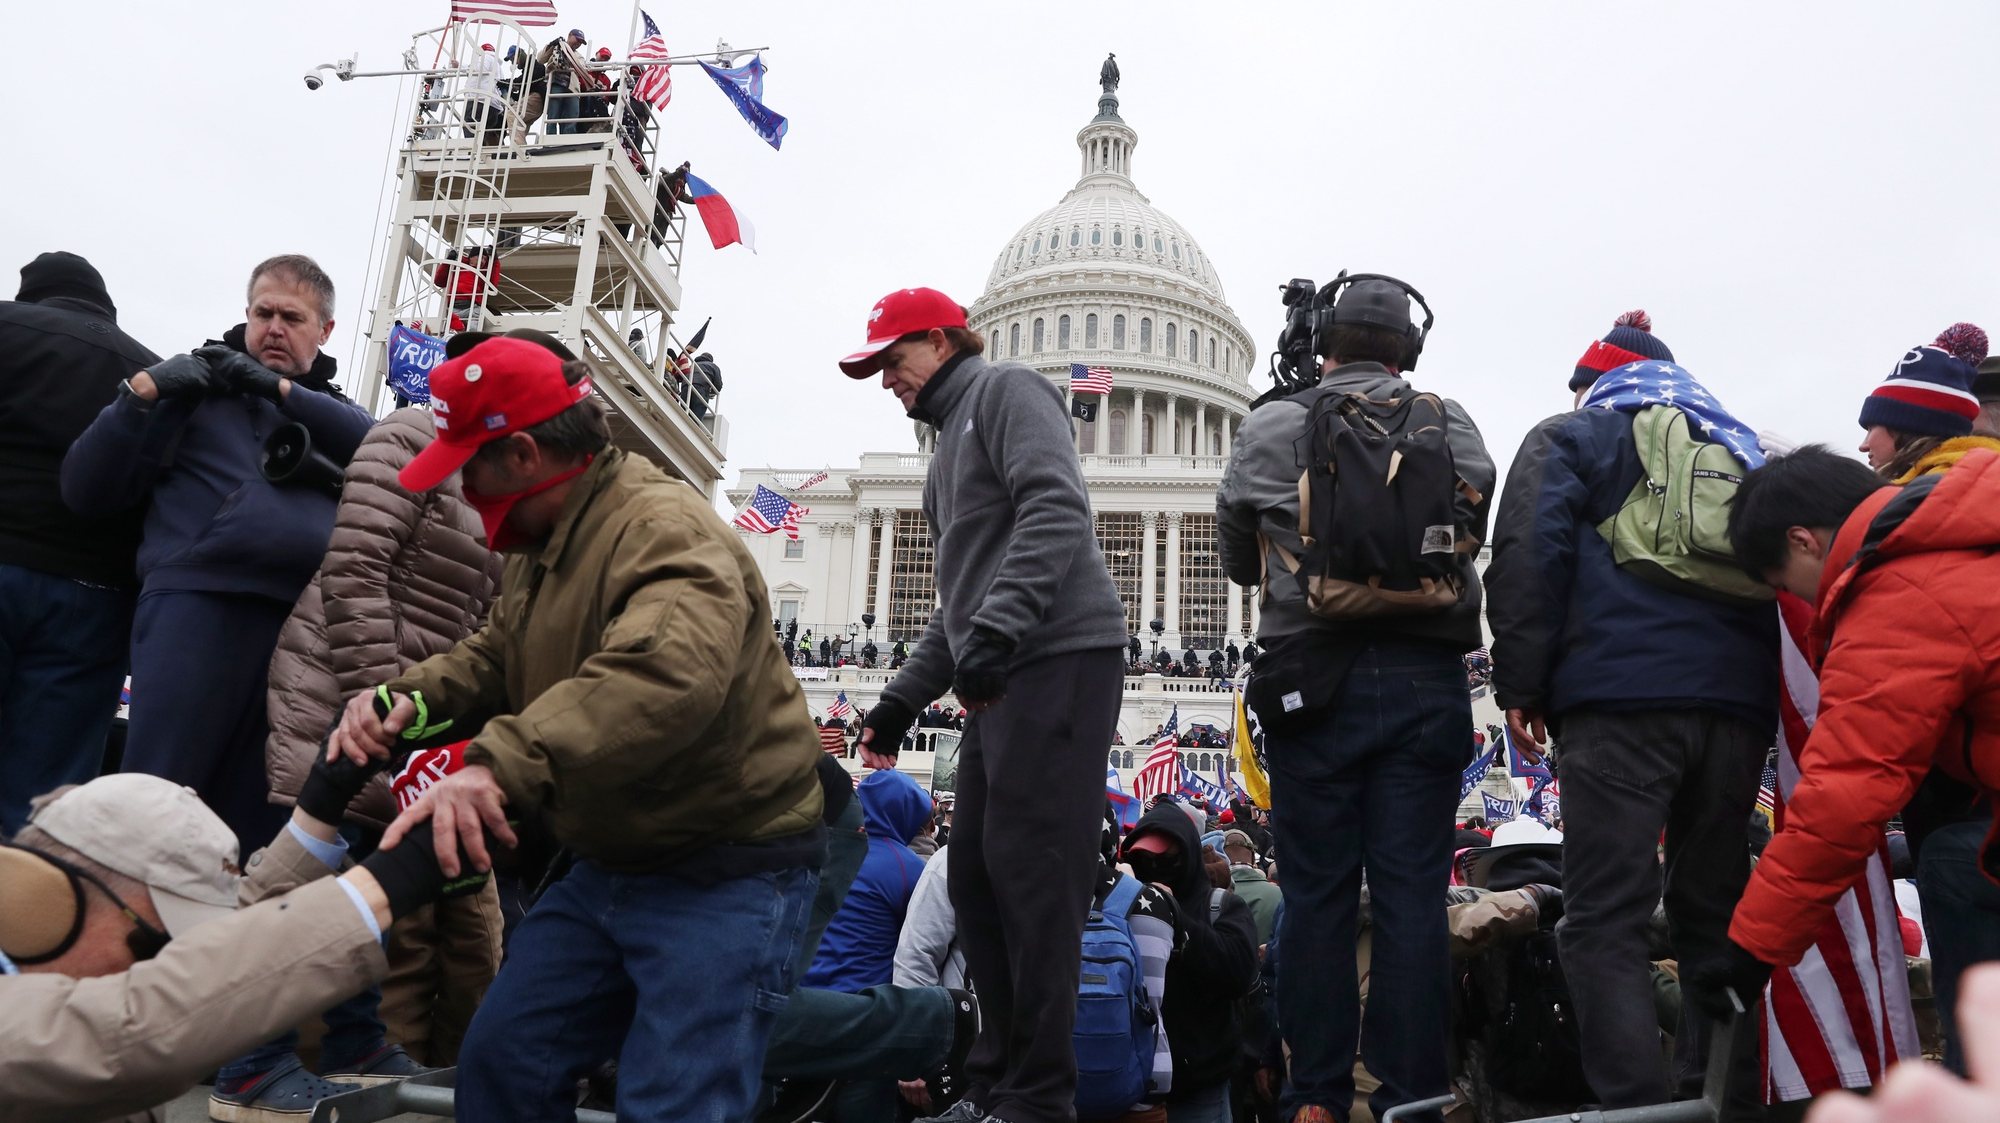 epa08923901 Pro-Trump protesters climb over a barricade while storming the grounds of the West Front of the US Capitol, in Washington, DC, USA, 06 January 2021. Right-wing conservative groups are protesting against Congress counting the electoral college votes. Dozens of state and federal judges have shot down challenges to the 2020 presidential election, finding the accusations of fraud to be without merit.  EPA/MICHAEL REYNOLDS